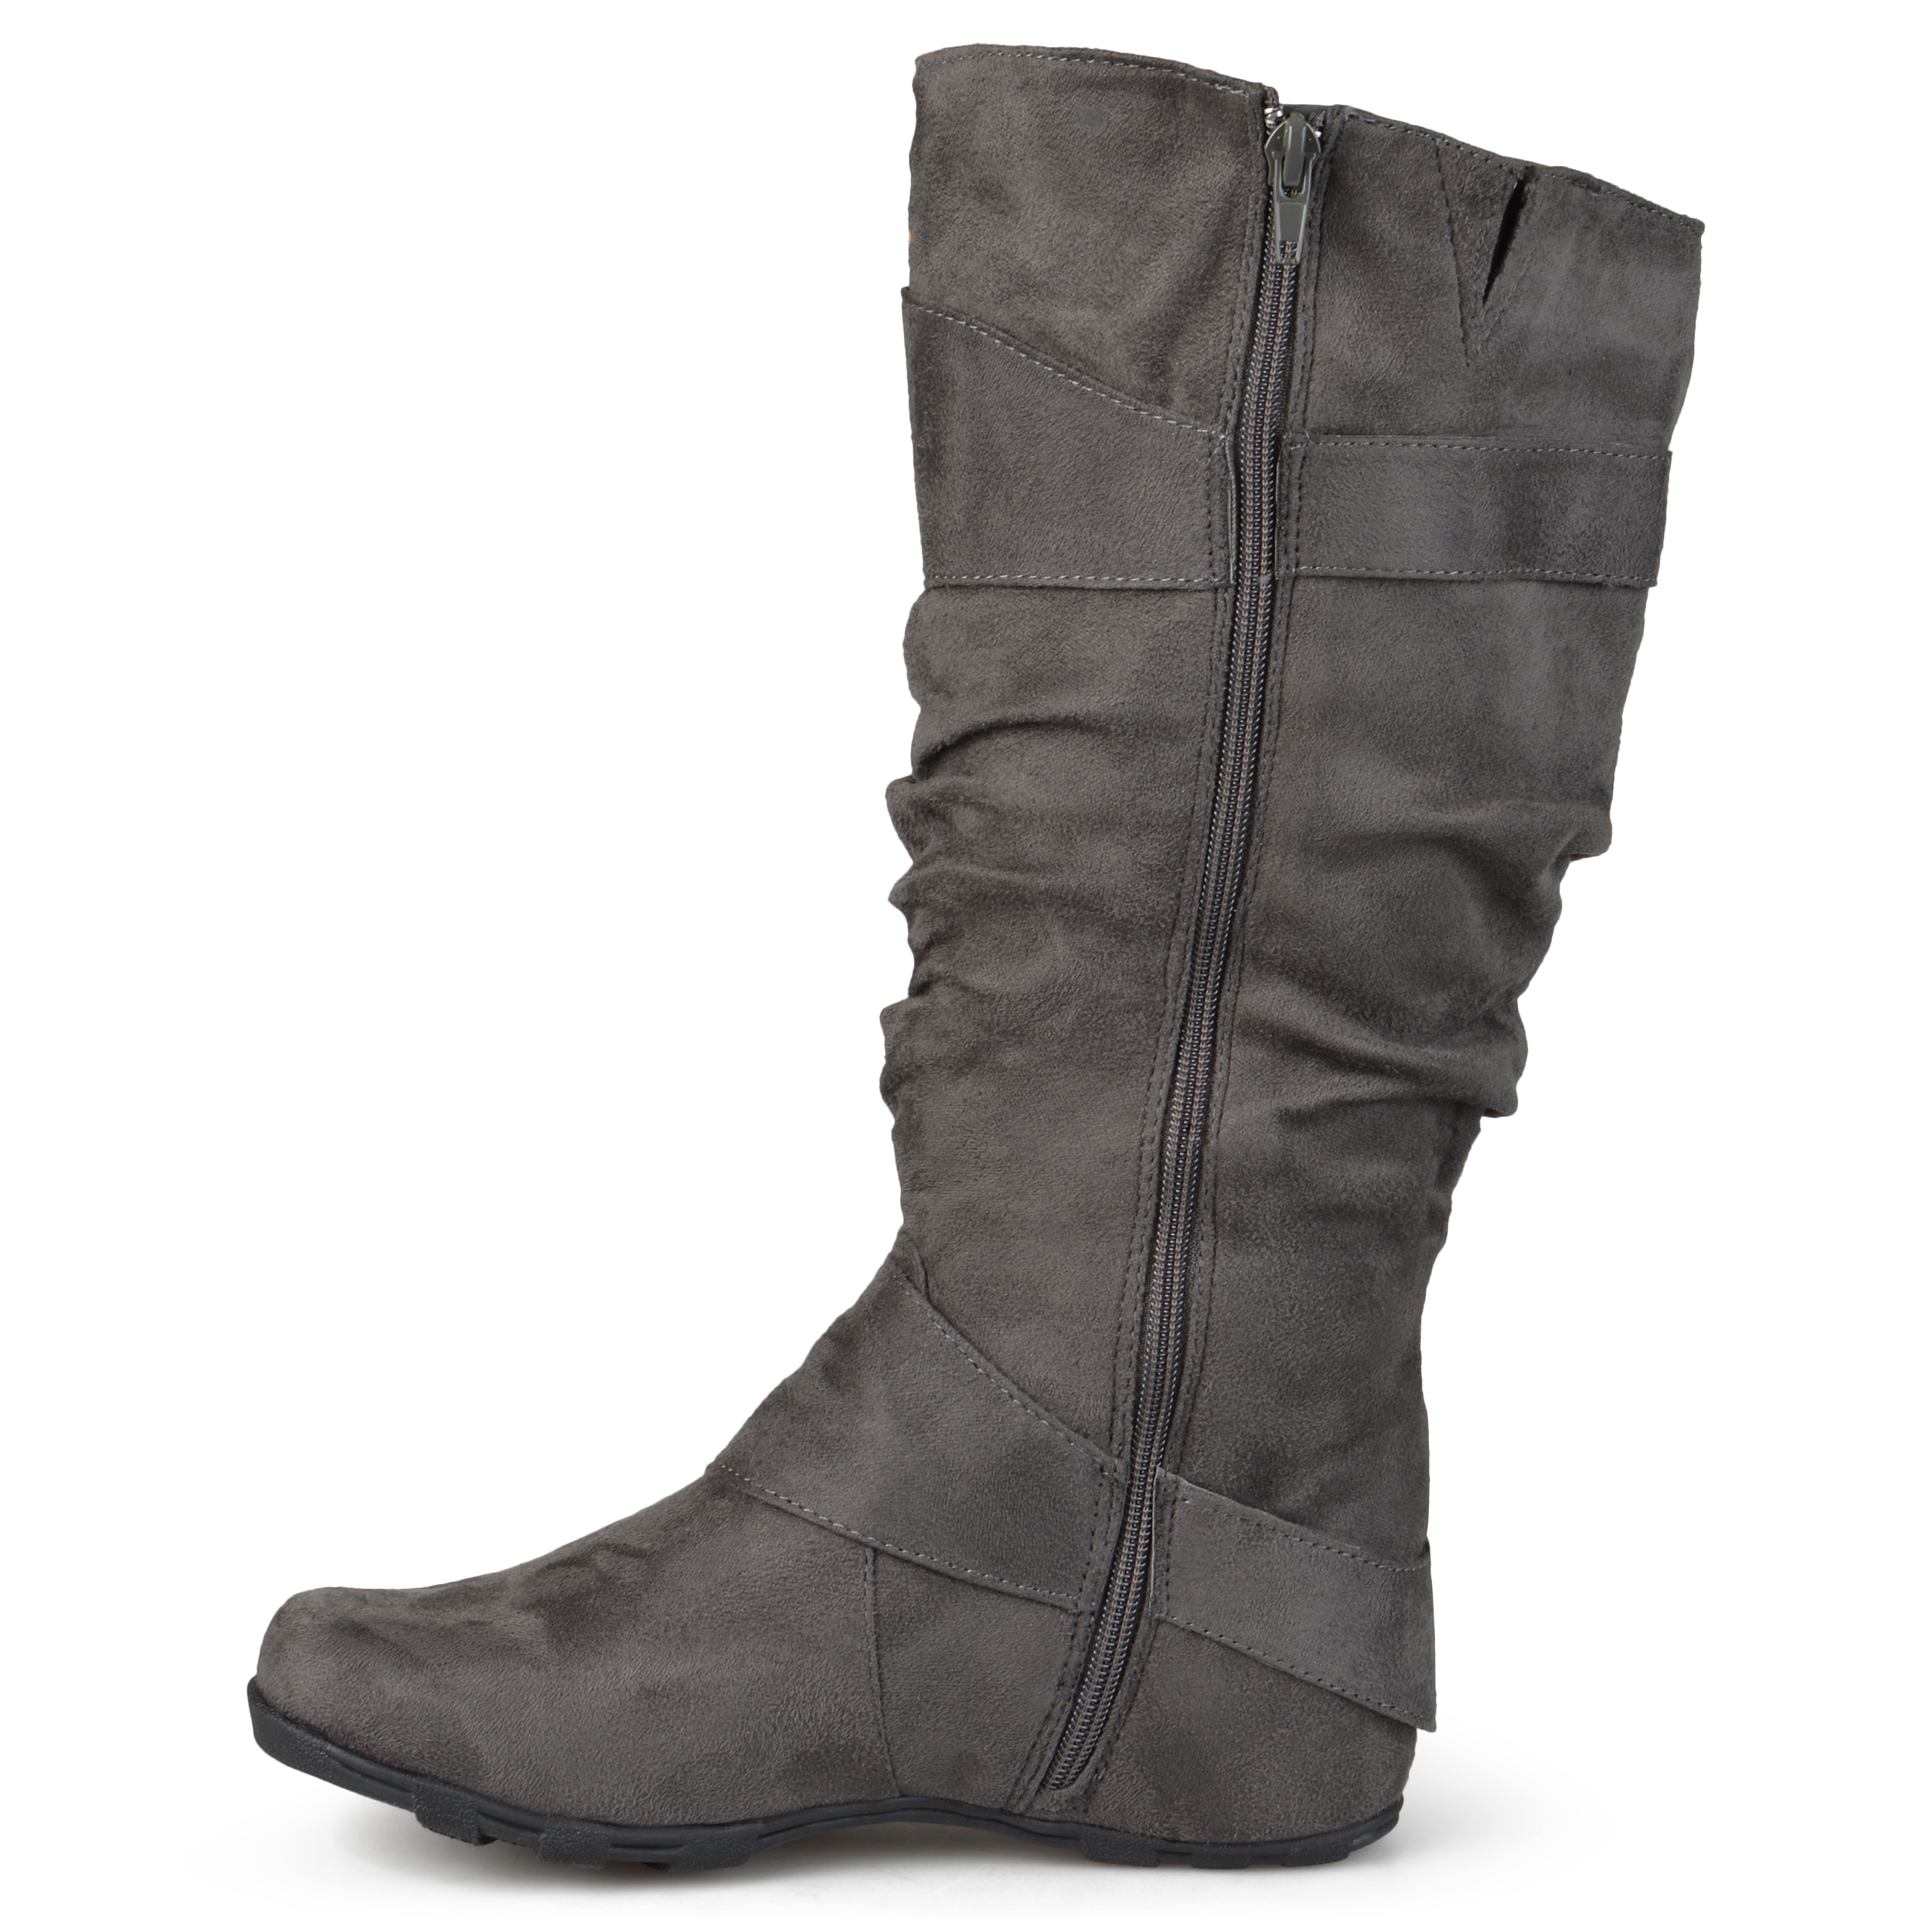 Women's Wide-Calf Buckle Knee-High Slouch Microsuede Boot - image 3 of 8